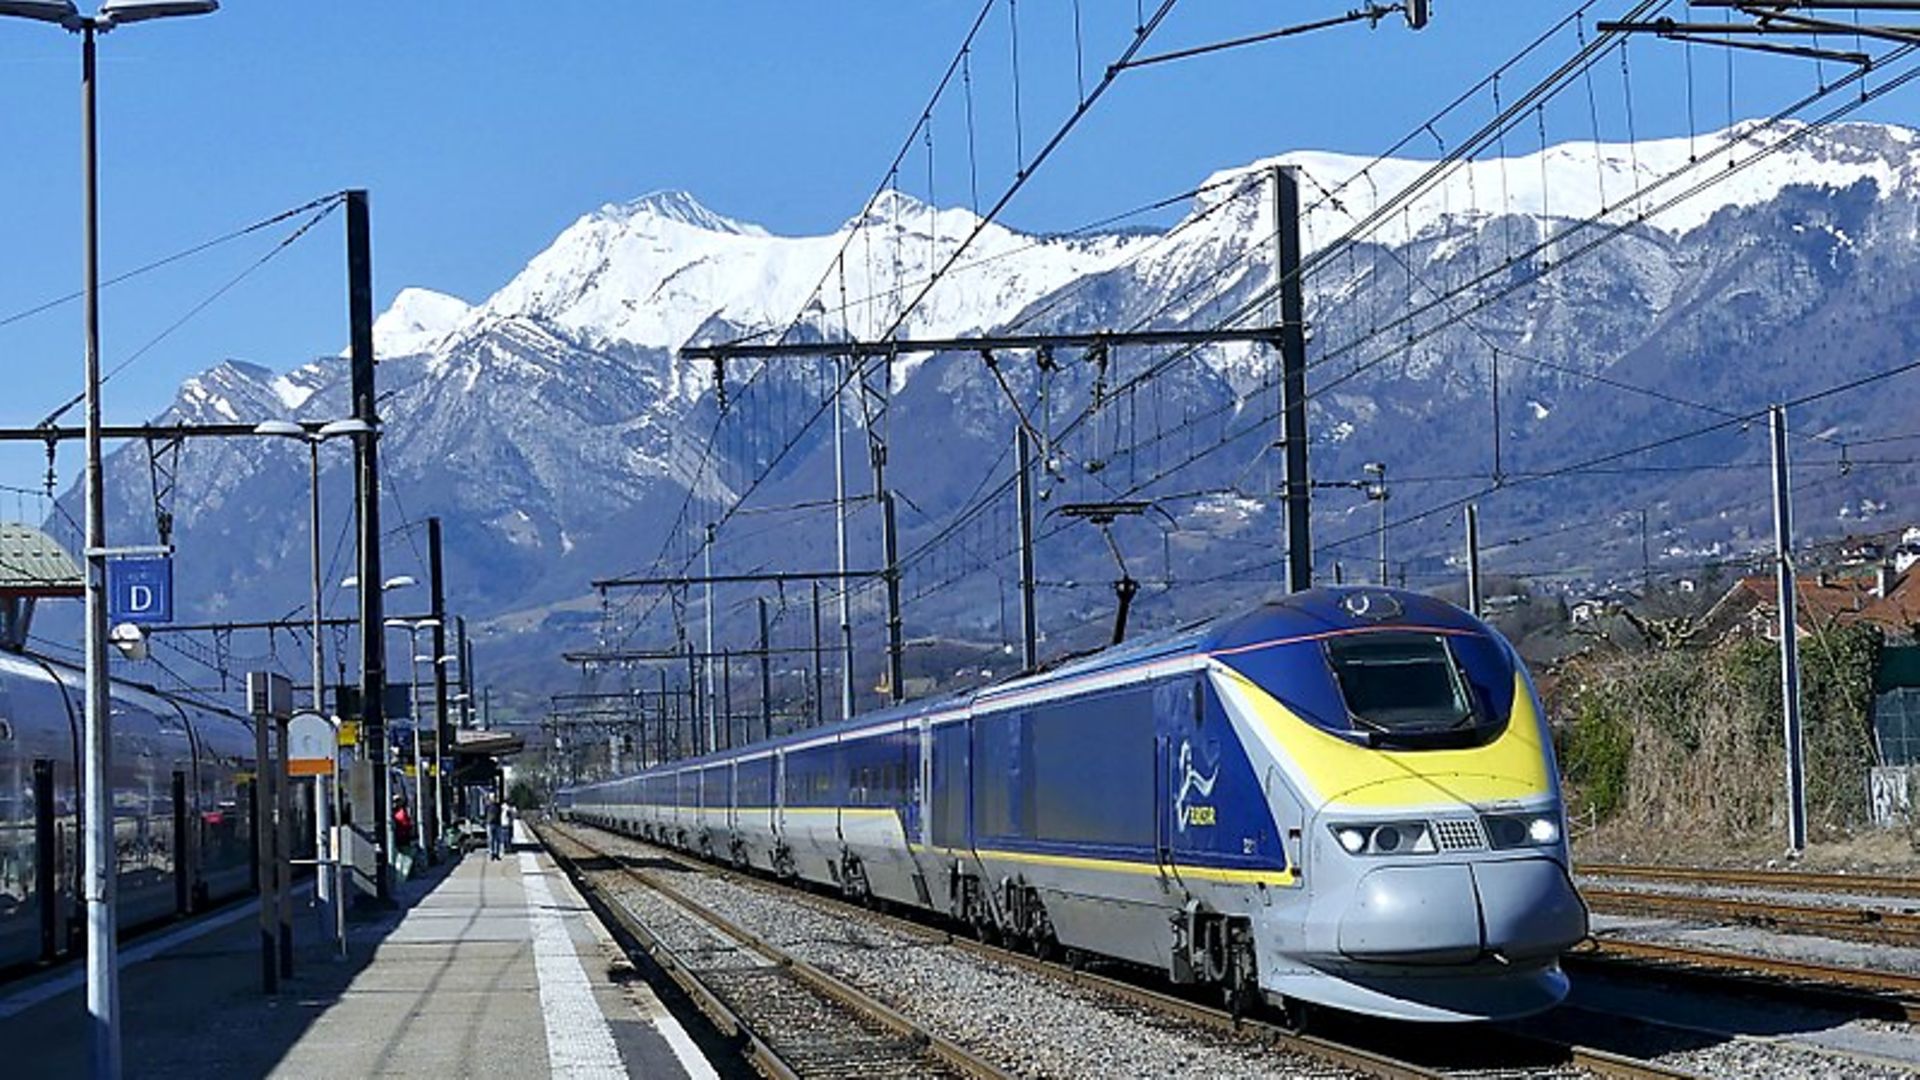 A Eurostar high-speed train travels from Bourg-Saint-Maurice (in the French Alps) to London